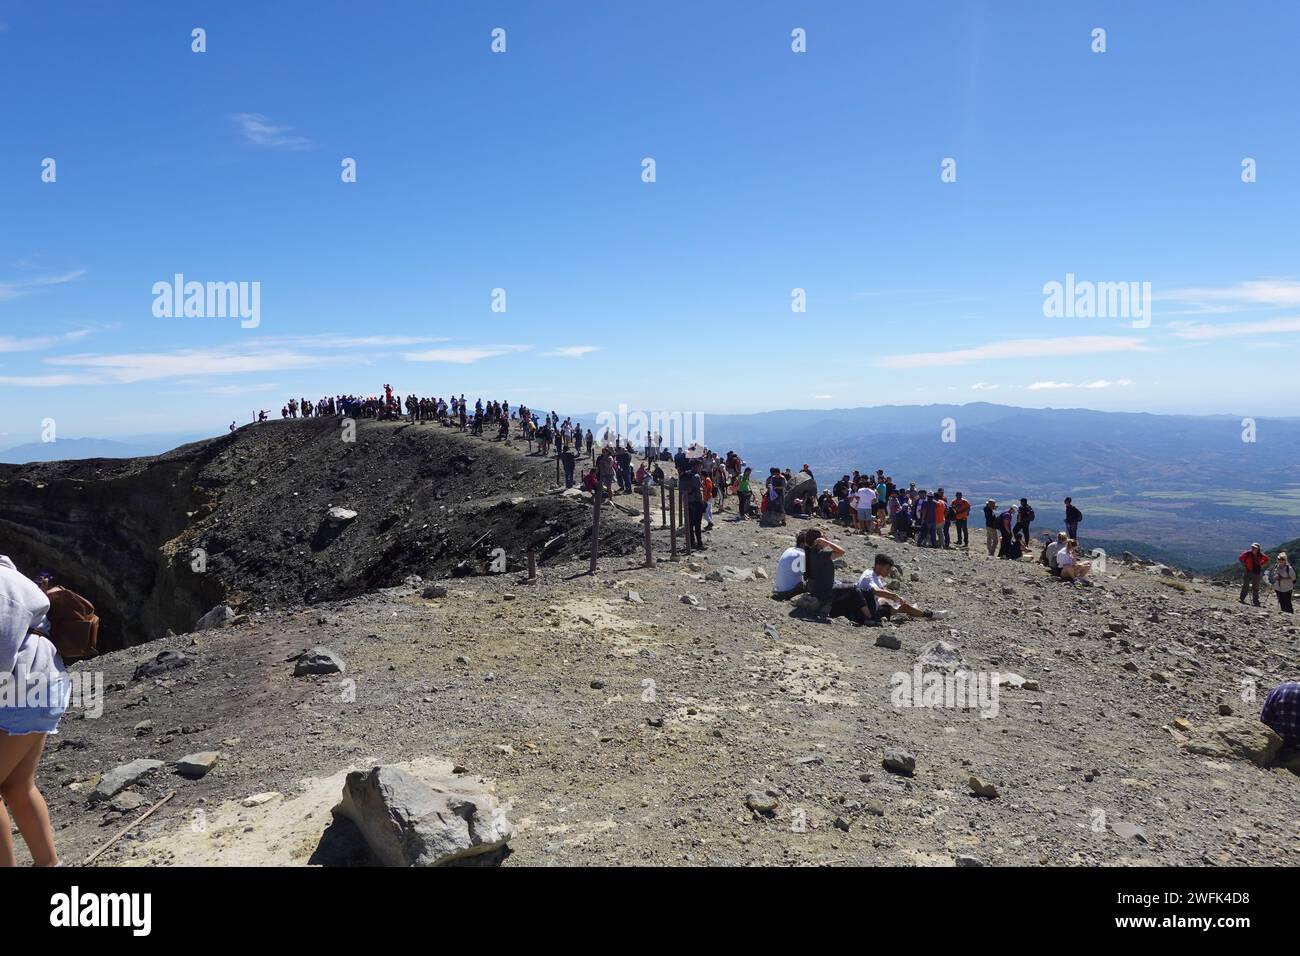 Crowds of tourists arriving at summit of Santa Ana volcano, El Salvador, Central America Stock Photo